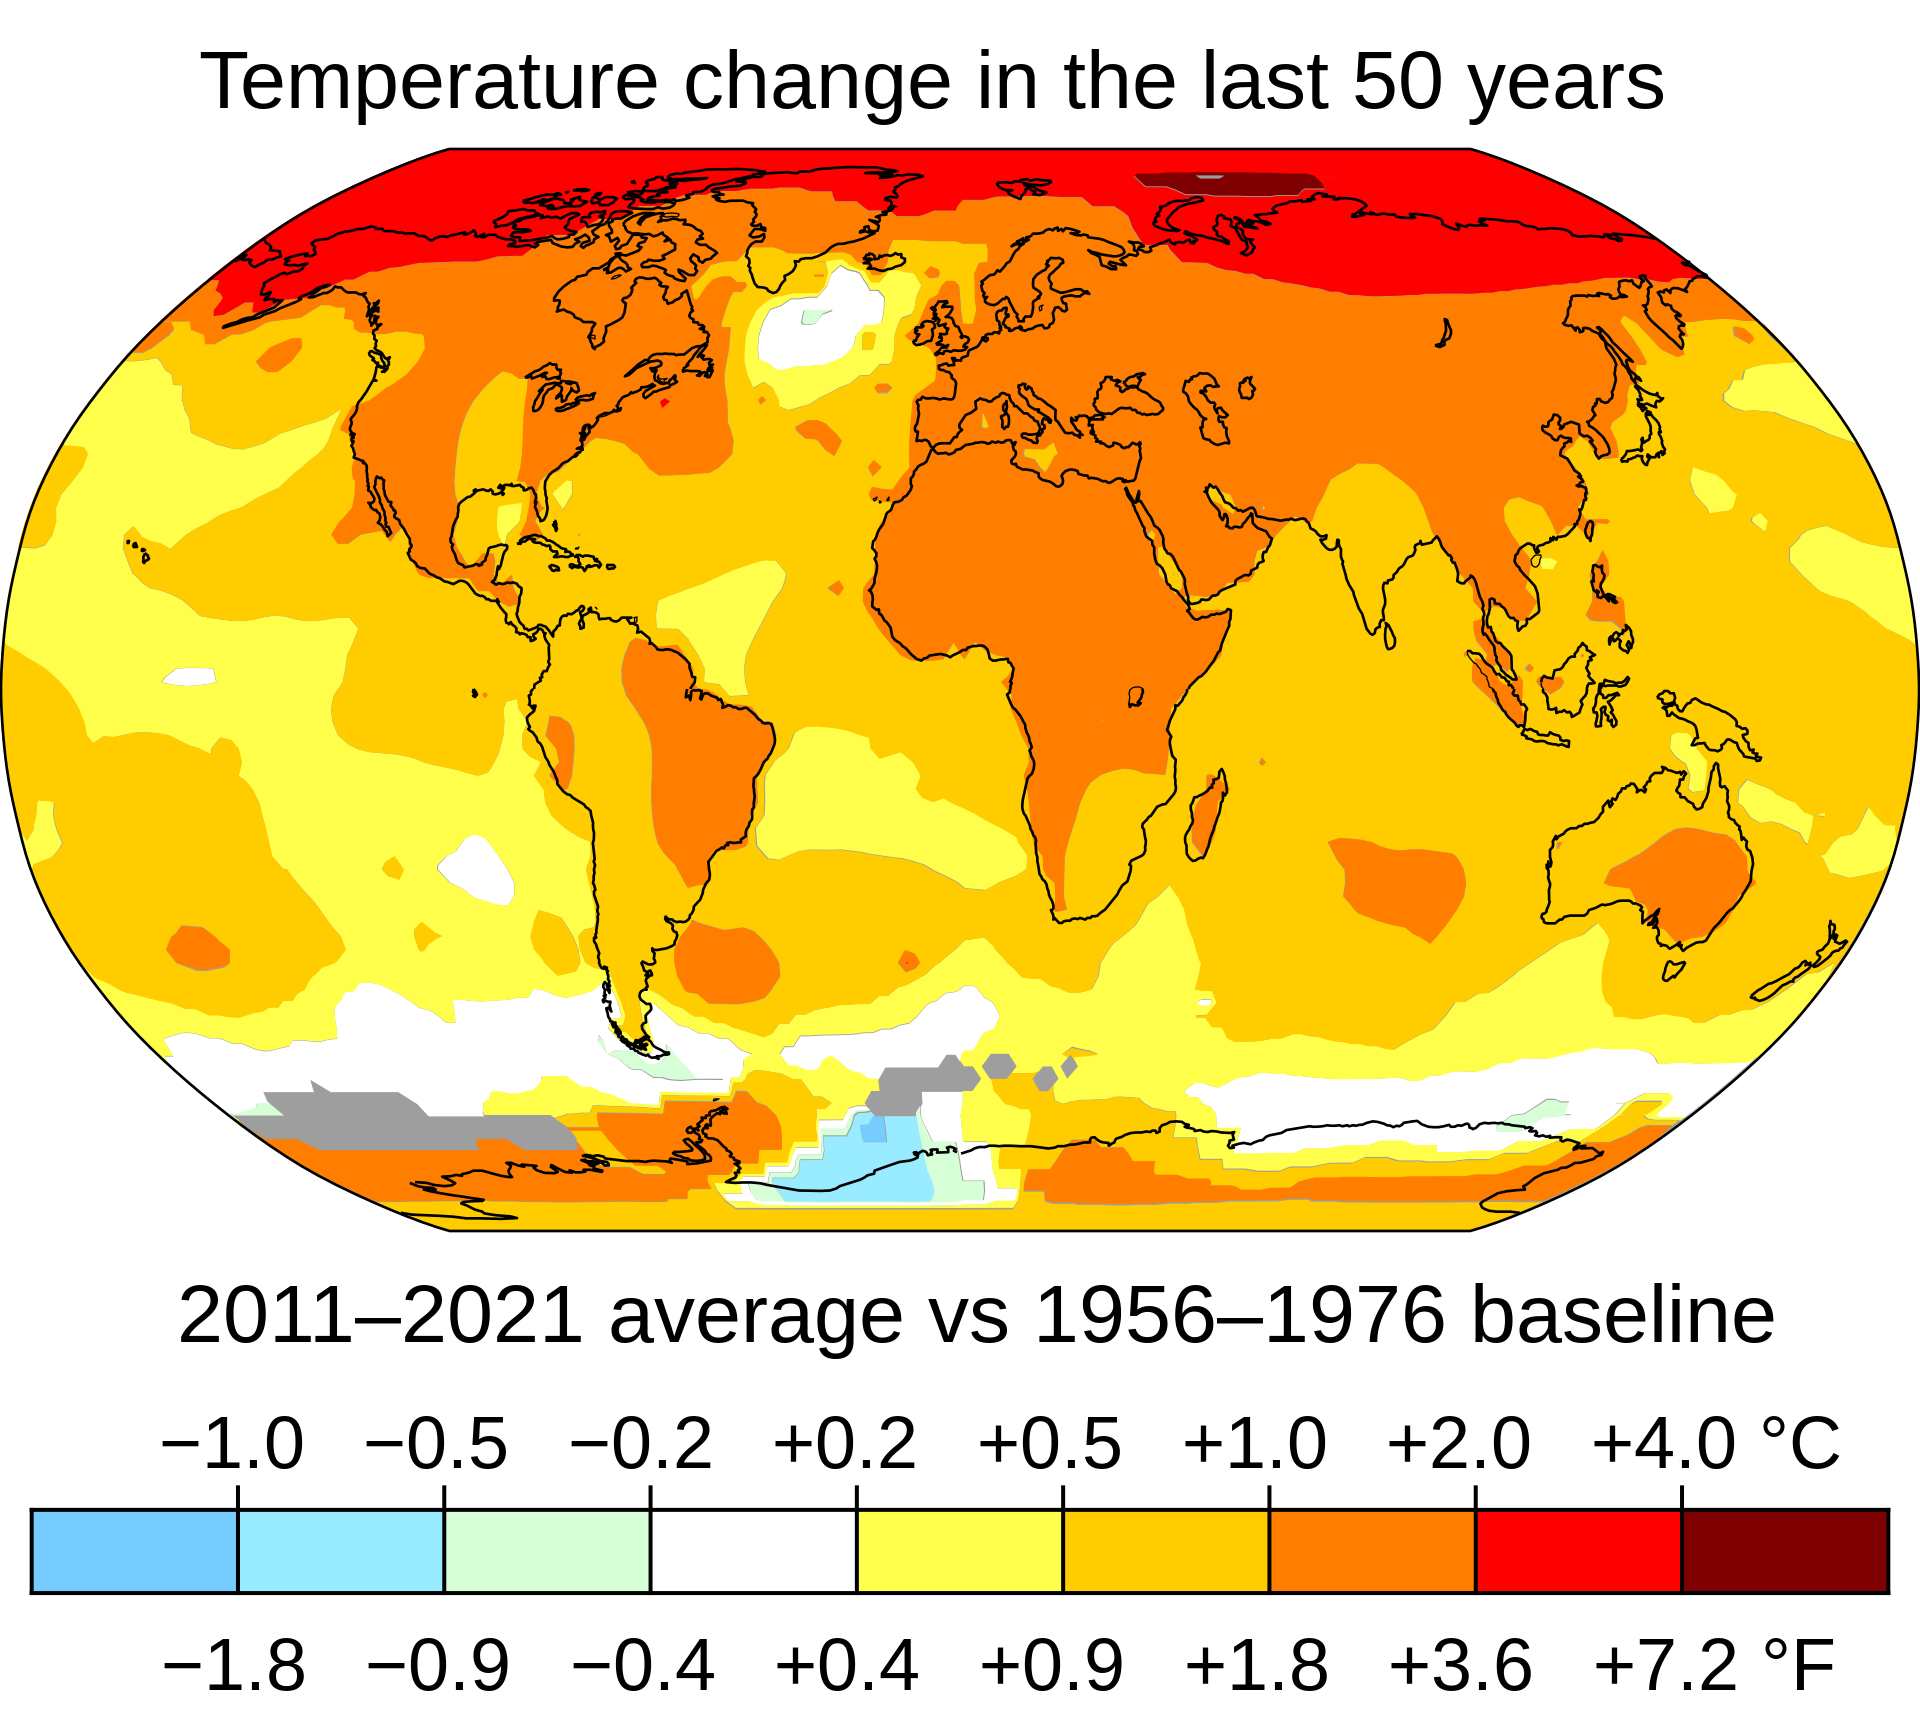 Map of temperature changes 2011-2021 vs 1956-1976